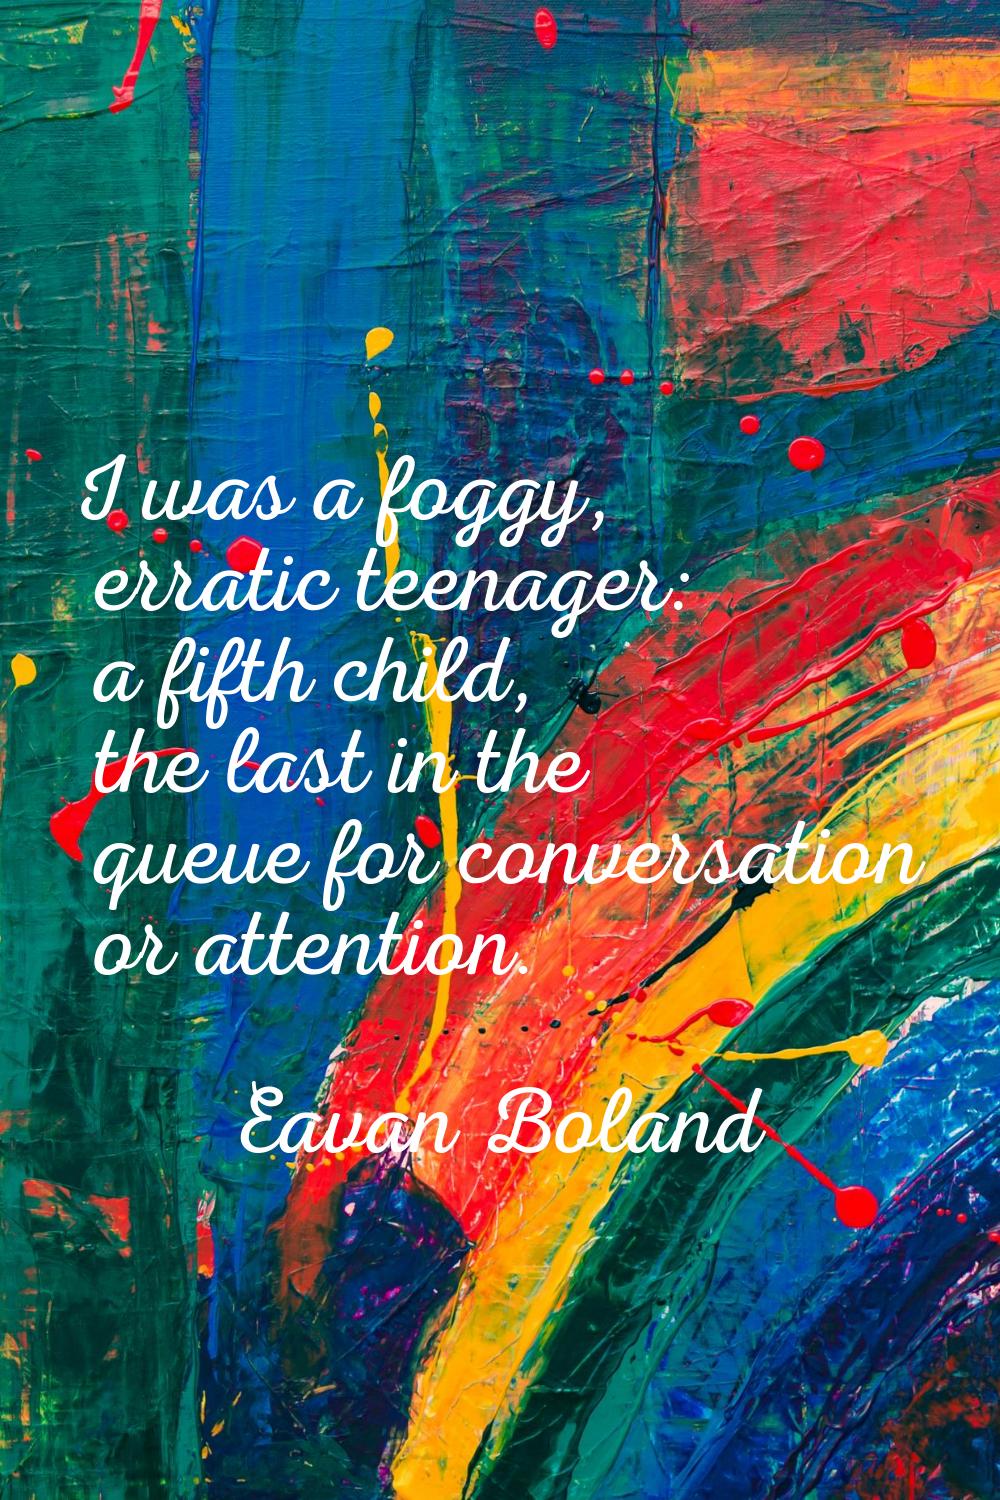 I was a foggy, erratic teenager: a fifth child, the last in the queue for conversation or attention